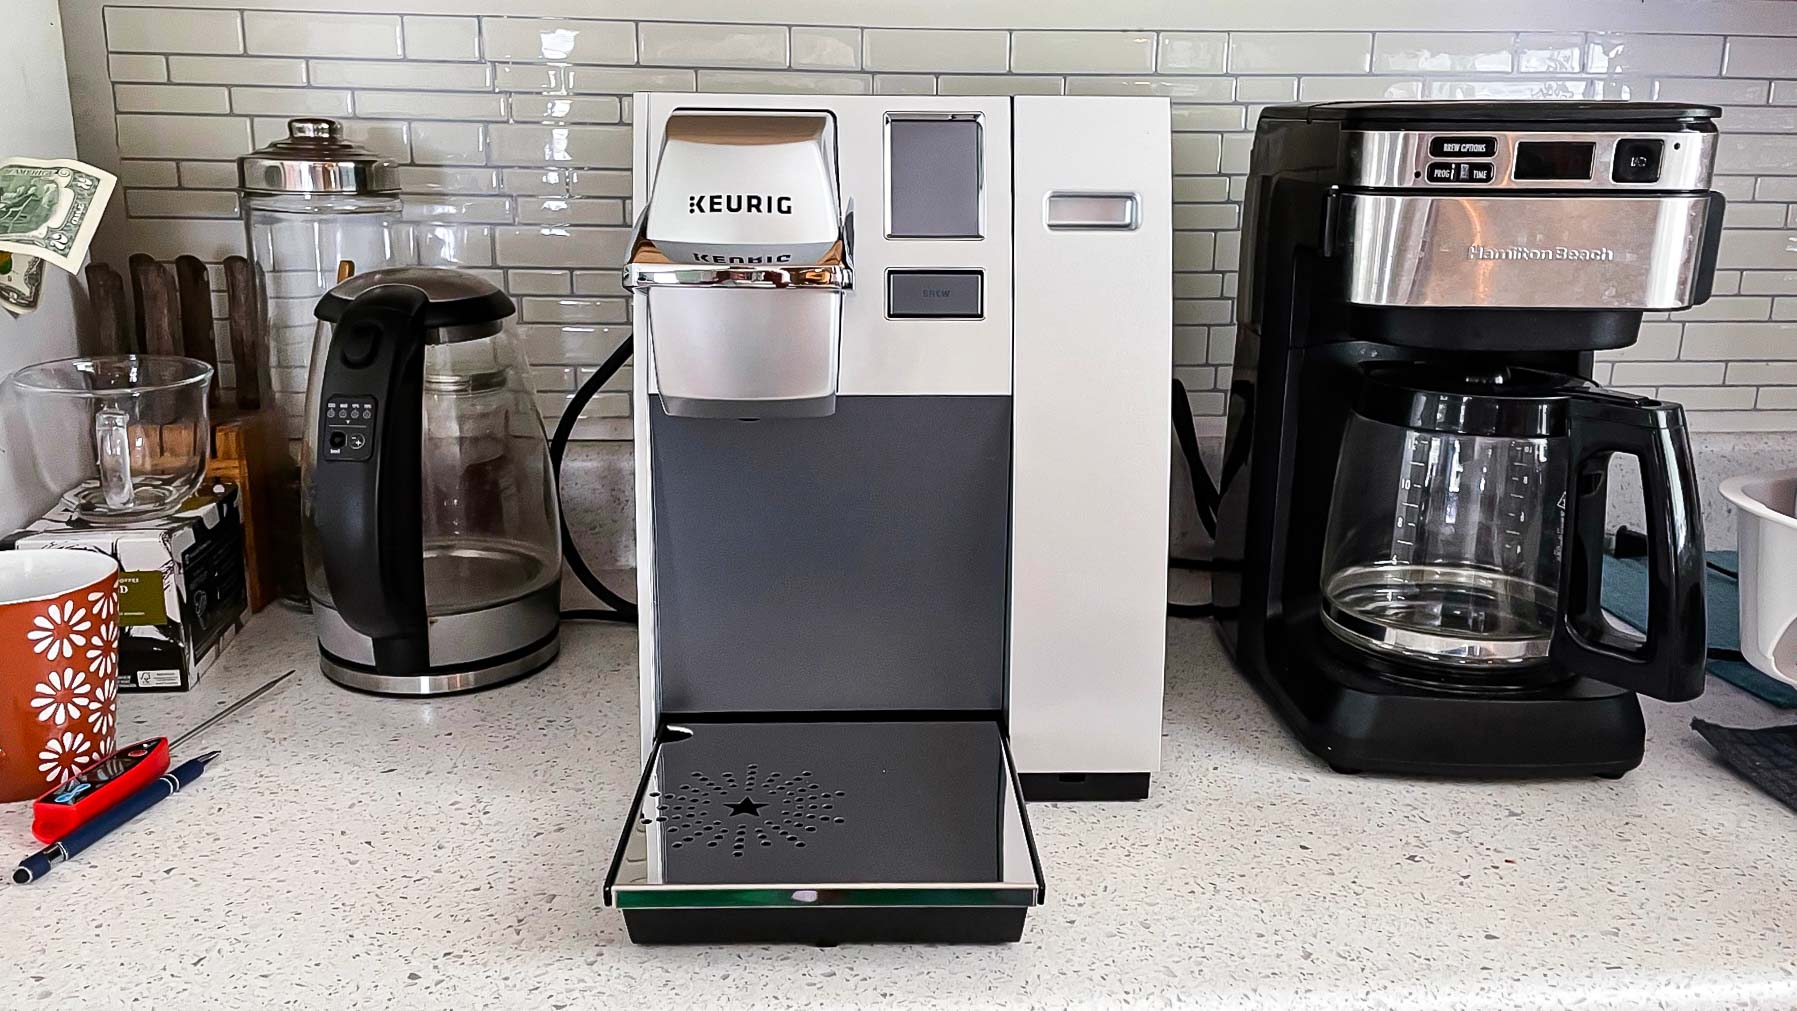 Prime: Keurig K-Cafe Coffee Maker AND Milk Frother Only